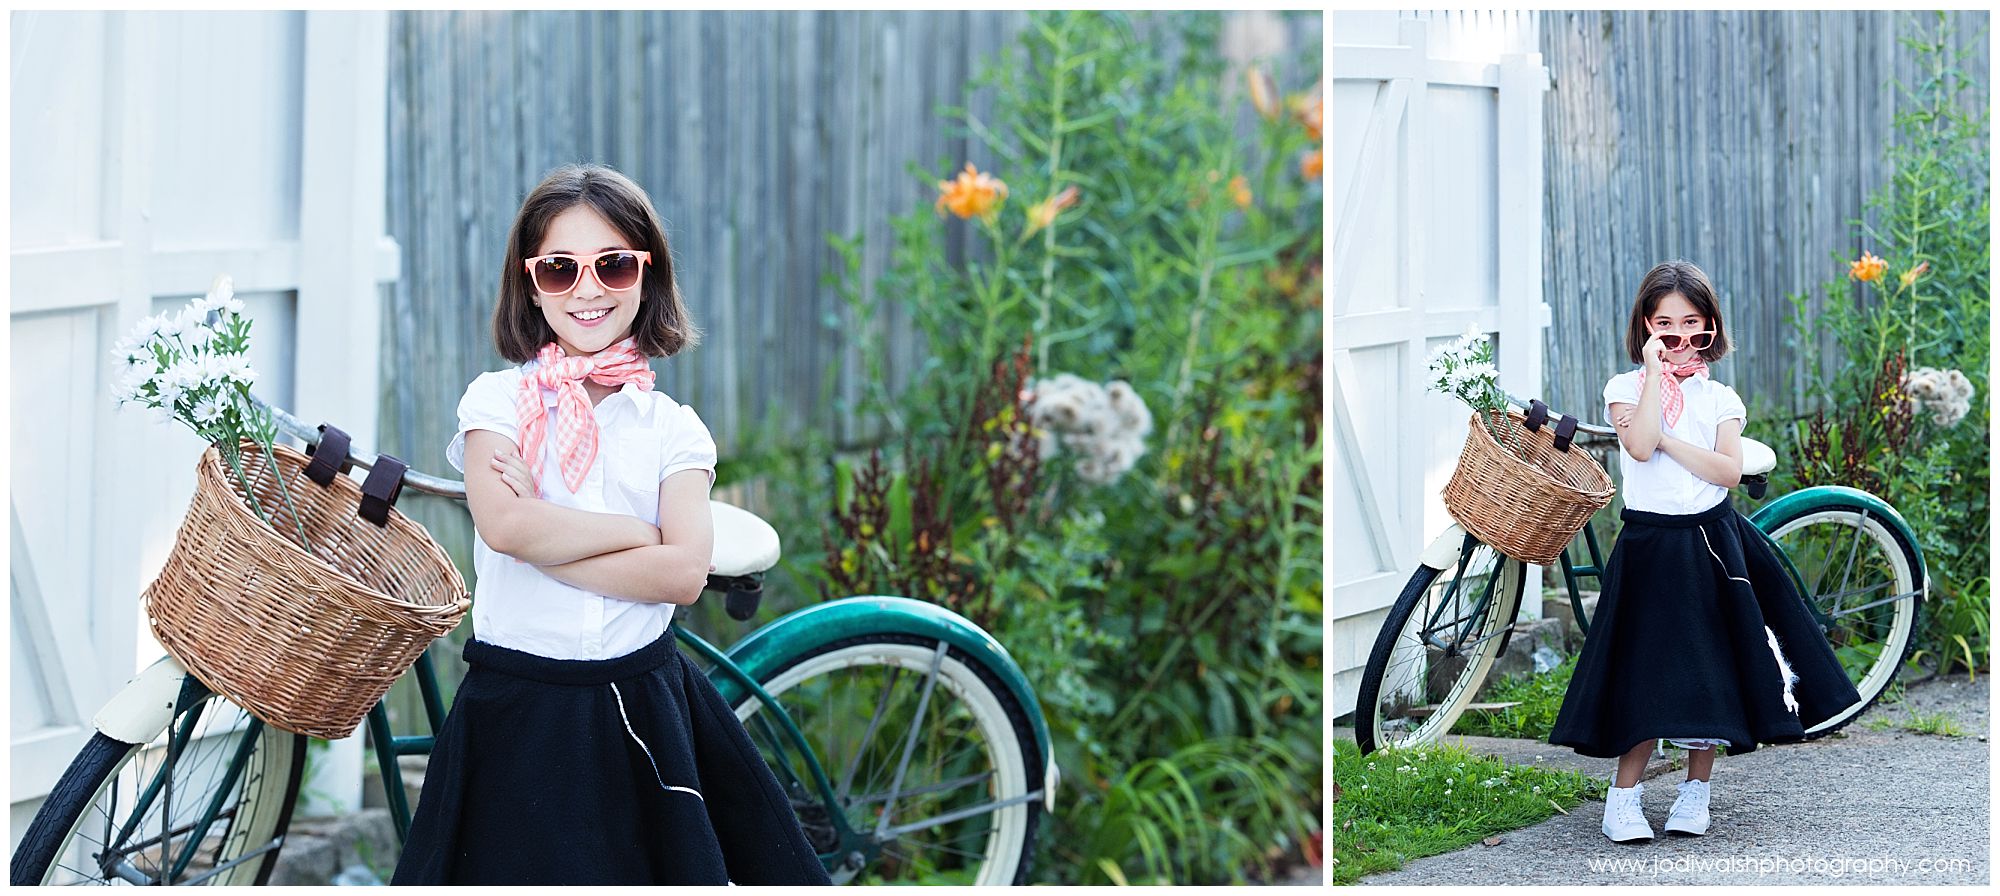 50s girl with poodle skirt and vintage bike